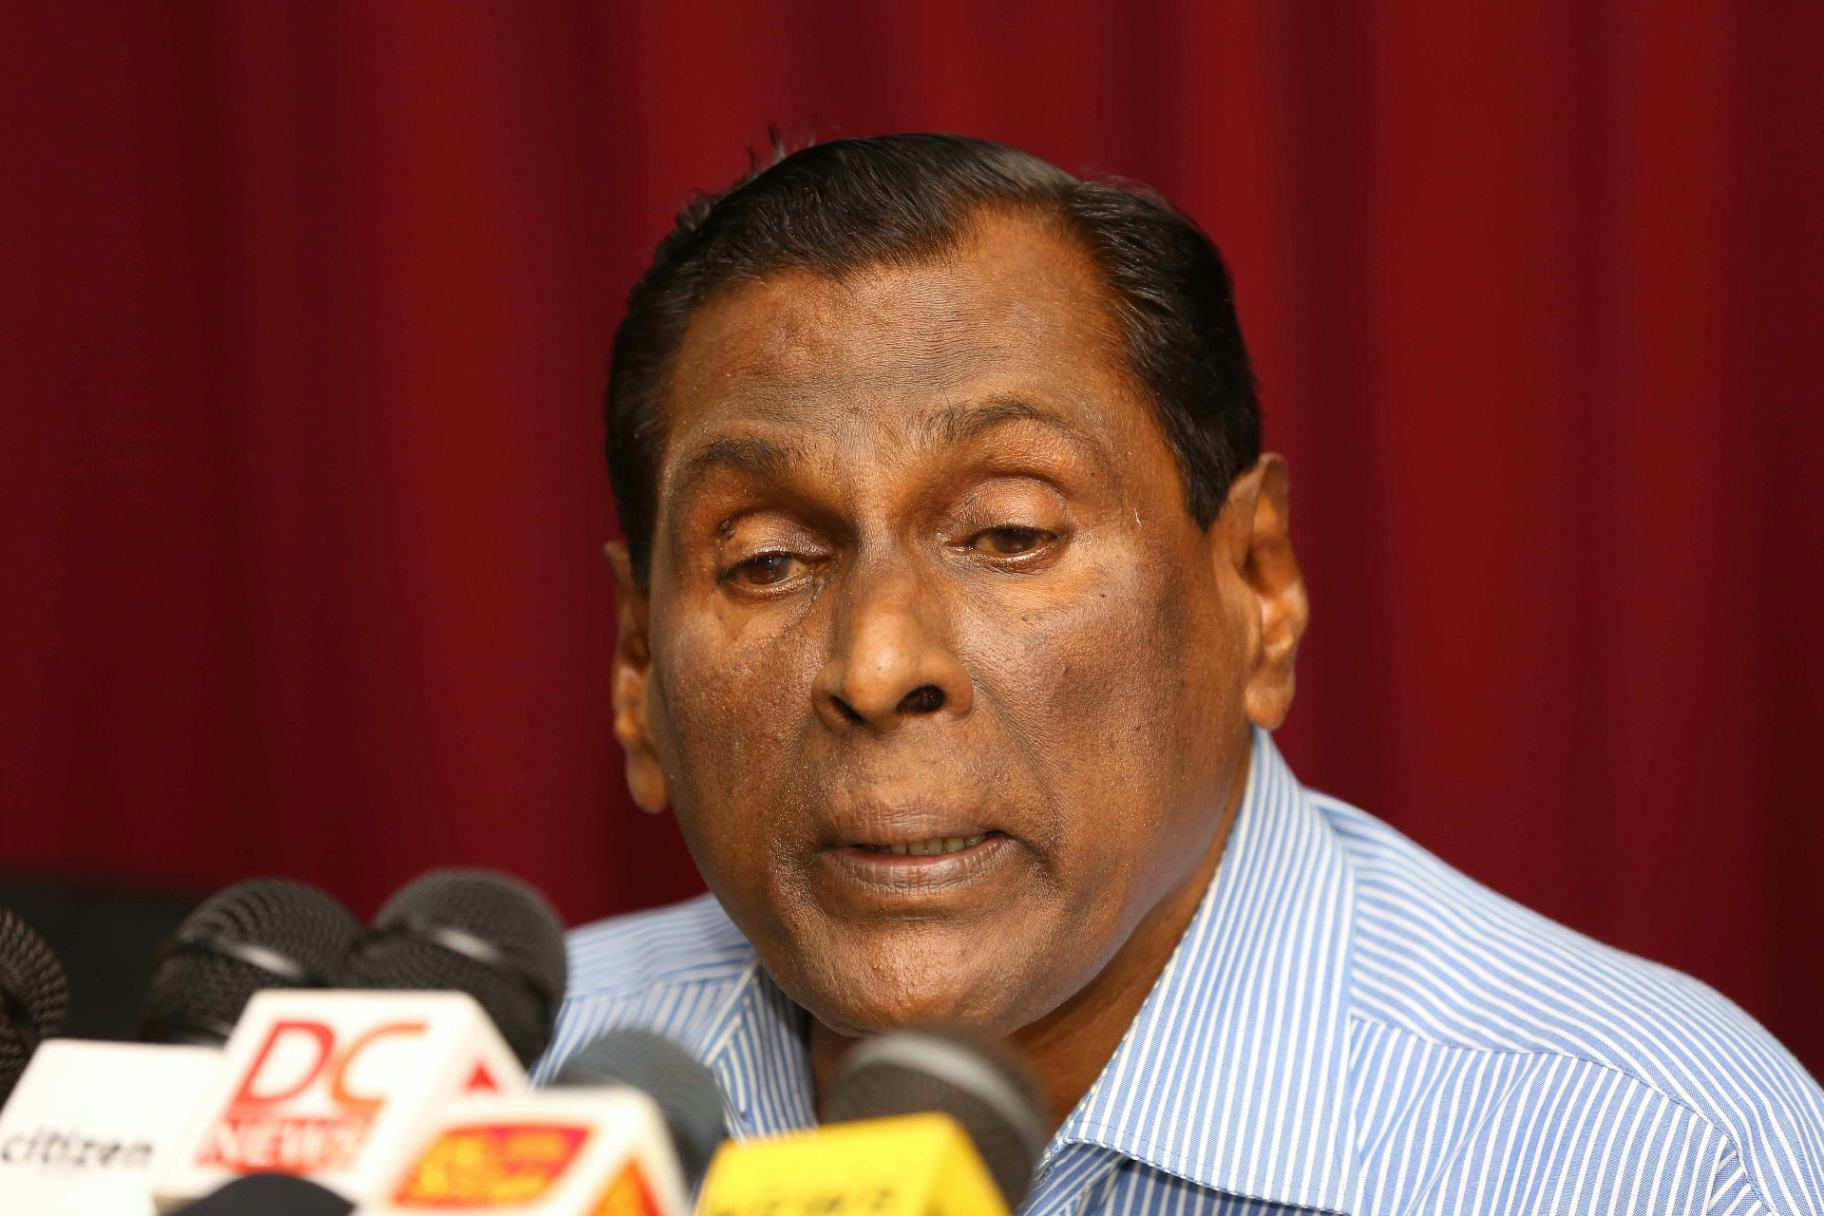 If Govt. is firm, power sector reforms cannot be blocked: John Seneviratne